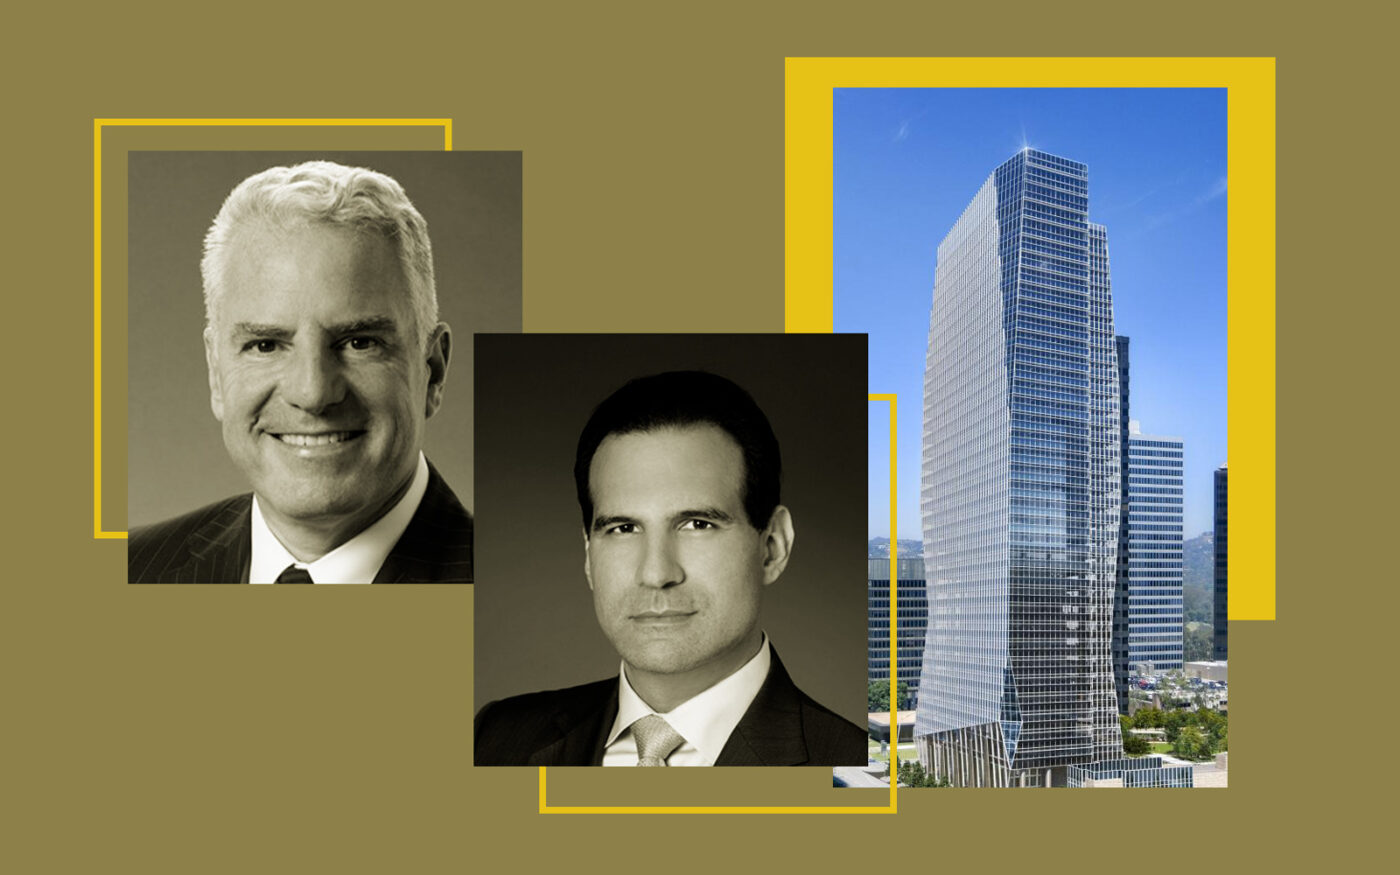 JMB Realty Signs Law FIrm Lease in Century City Tower